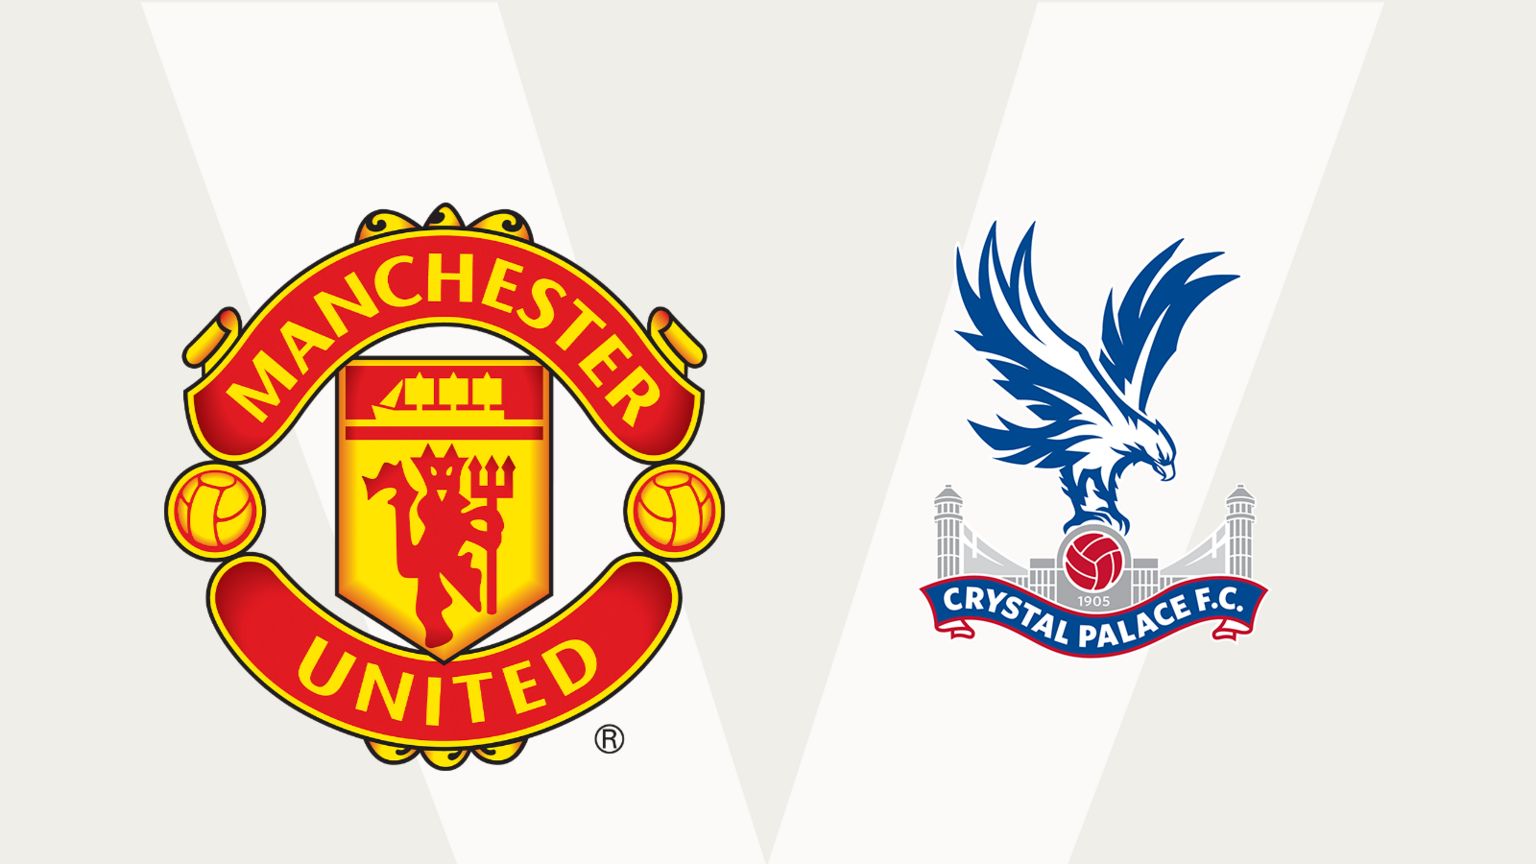 Manchester United and Crystal Palace badges